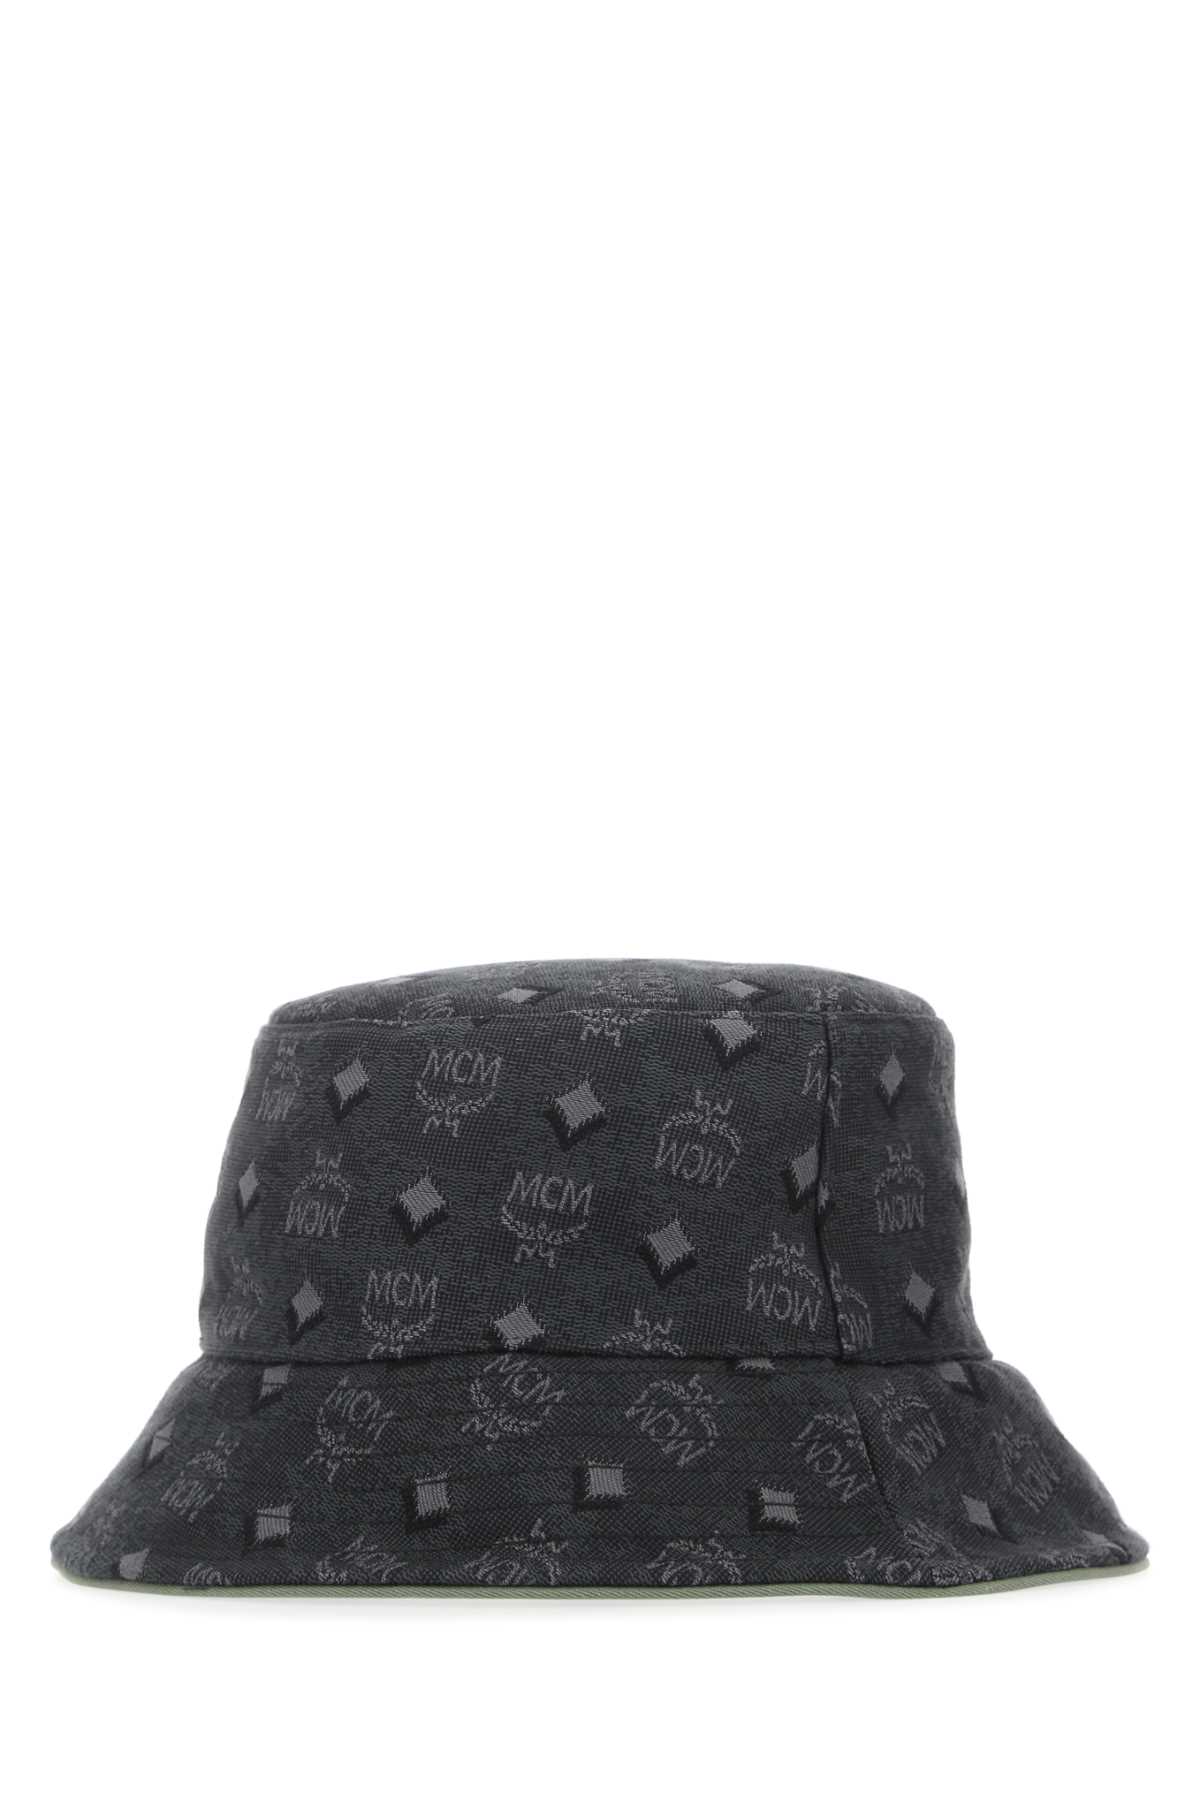 Mcm Embroidered Fabric Hat In Ed